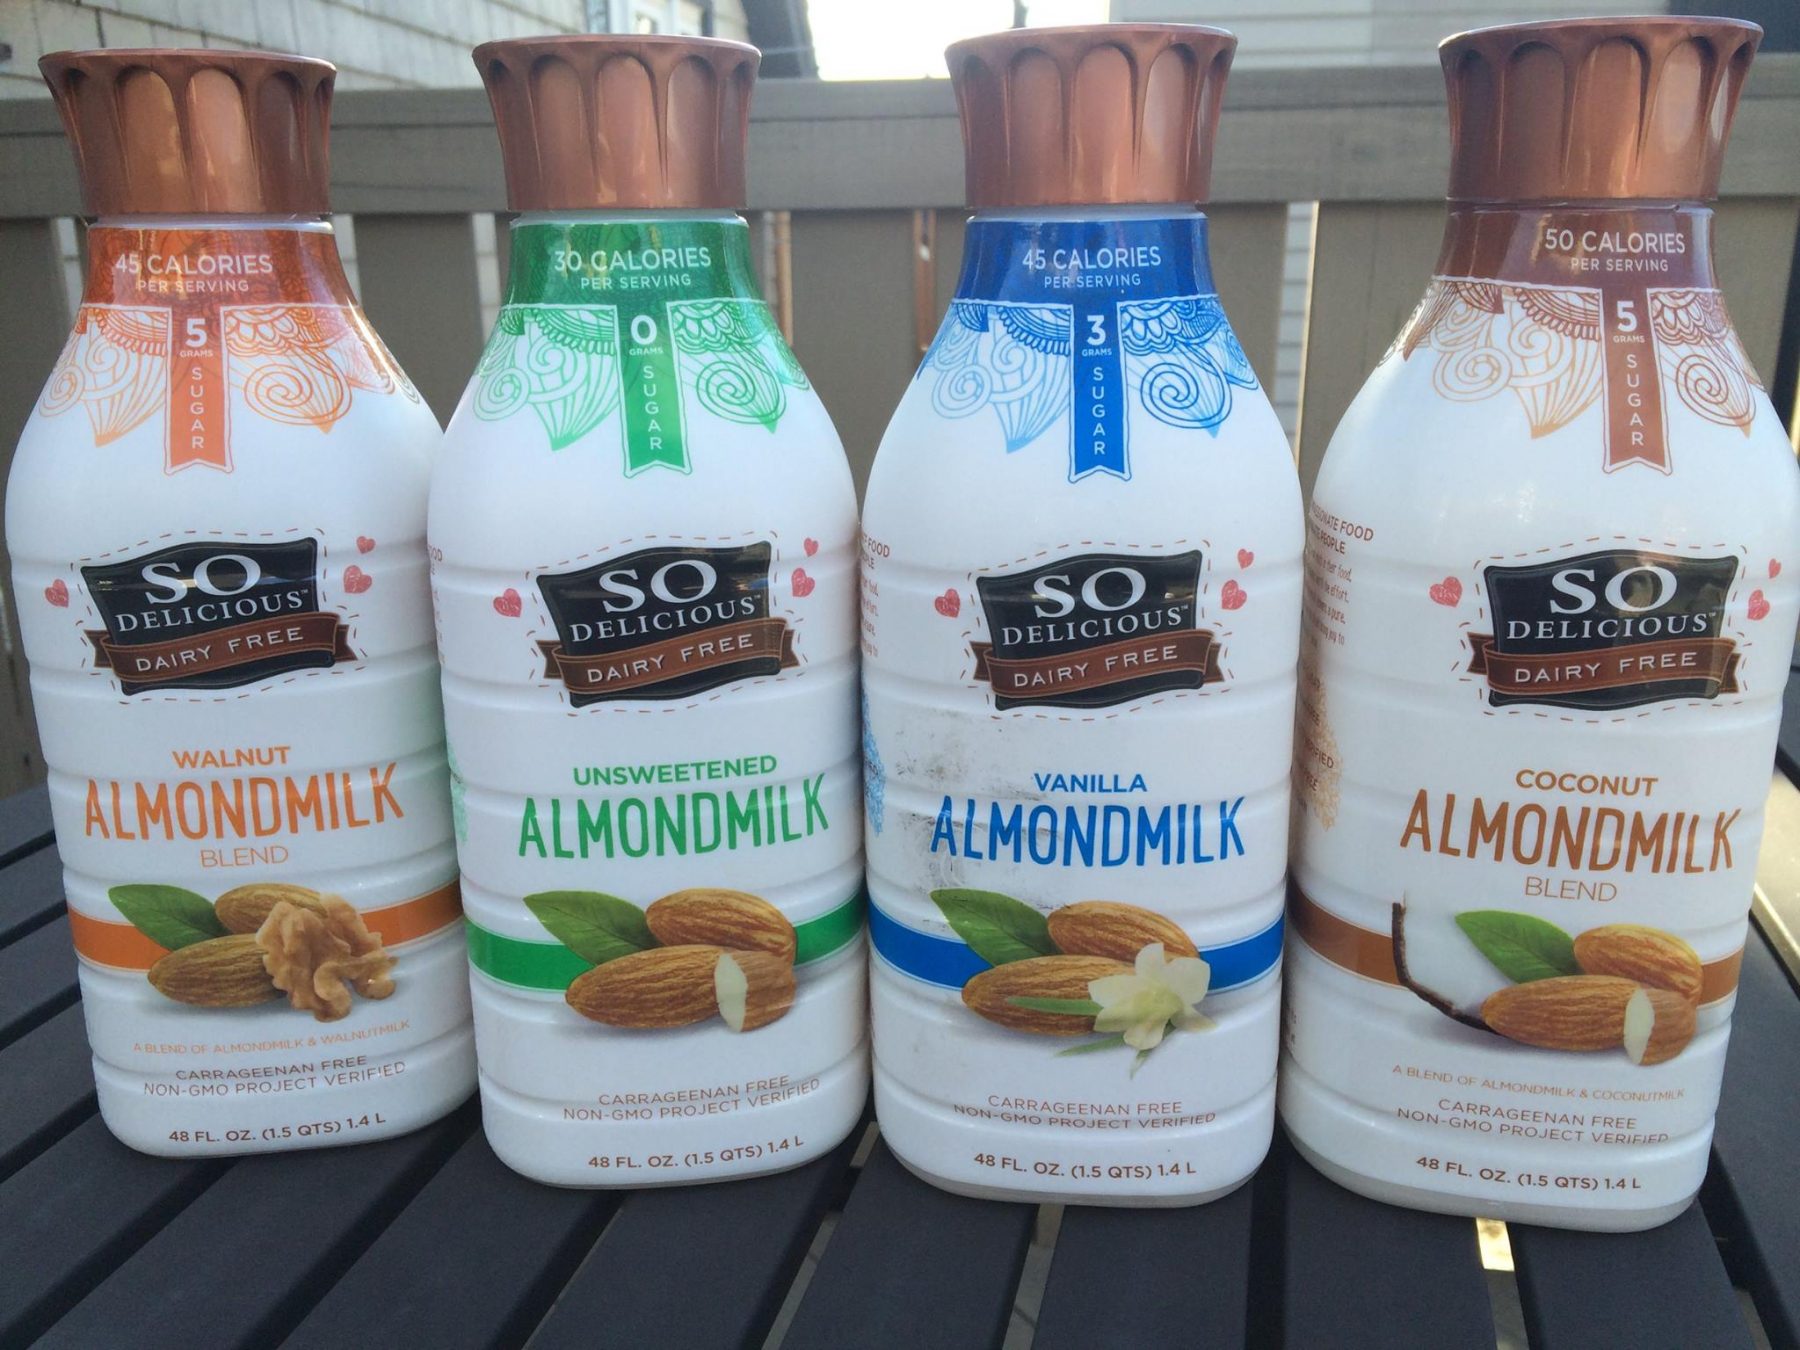 Almond Milk Blends From So Delicious Dairy Free!